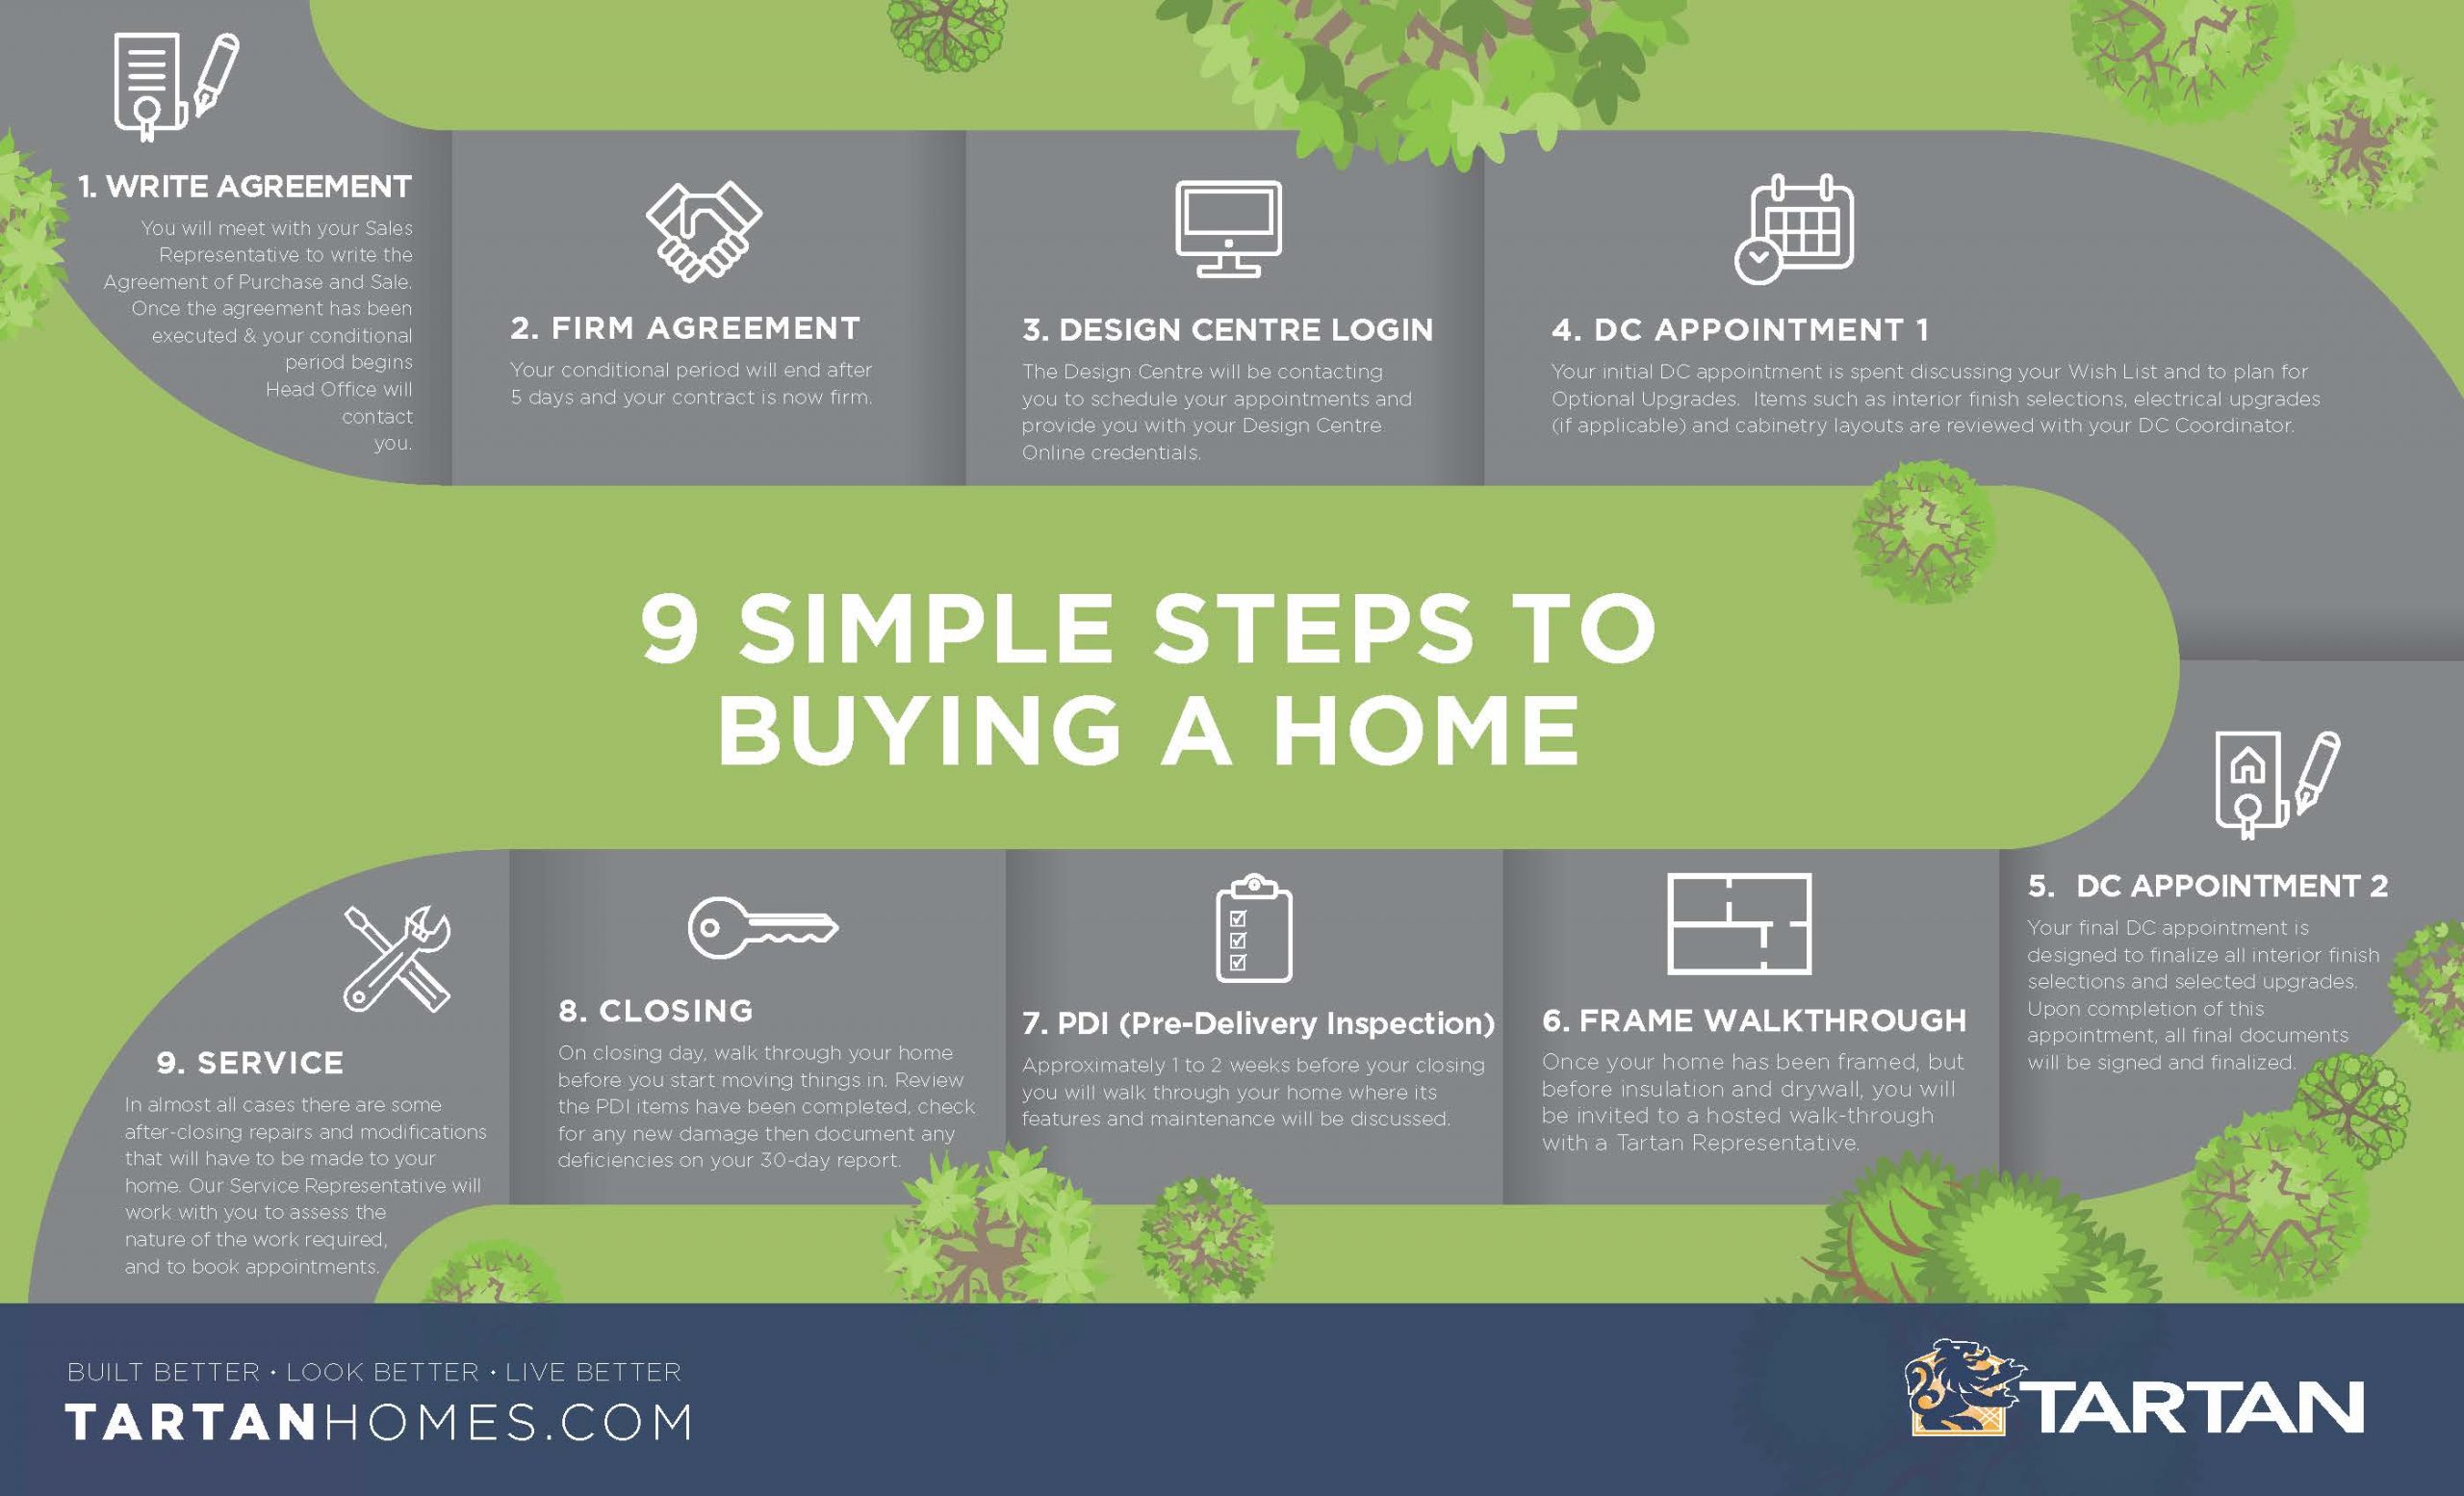  9 SIMPLE STEPS TO BUYING A NEW HOME